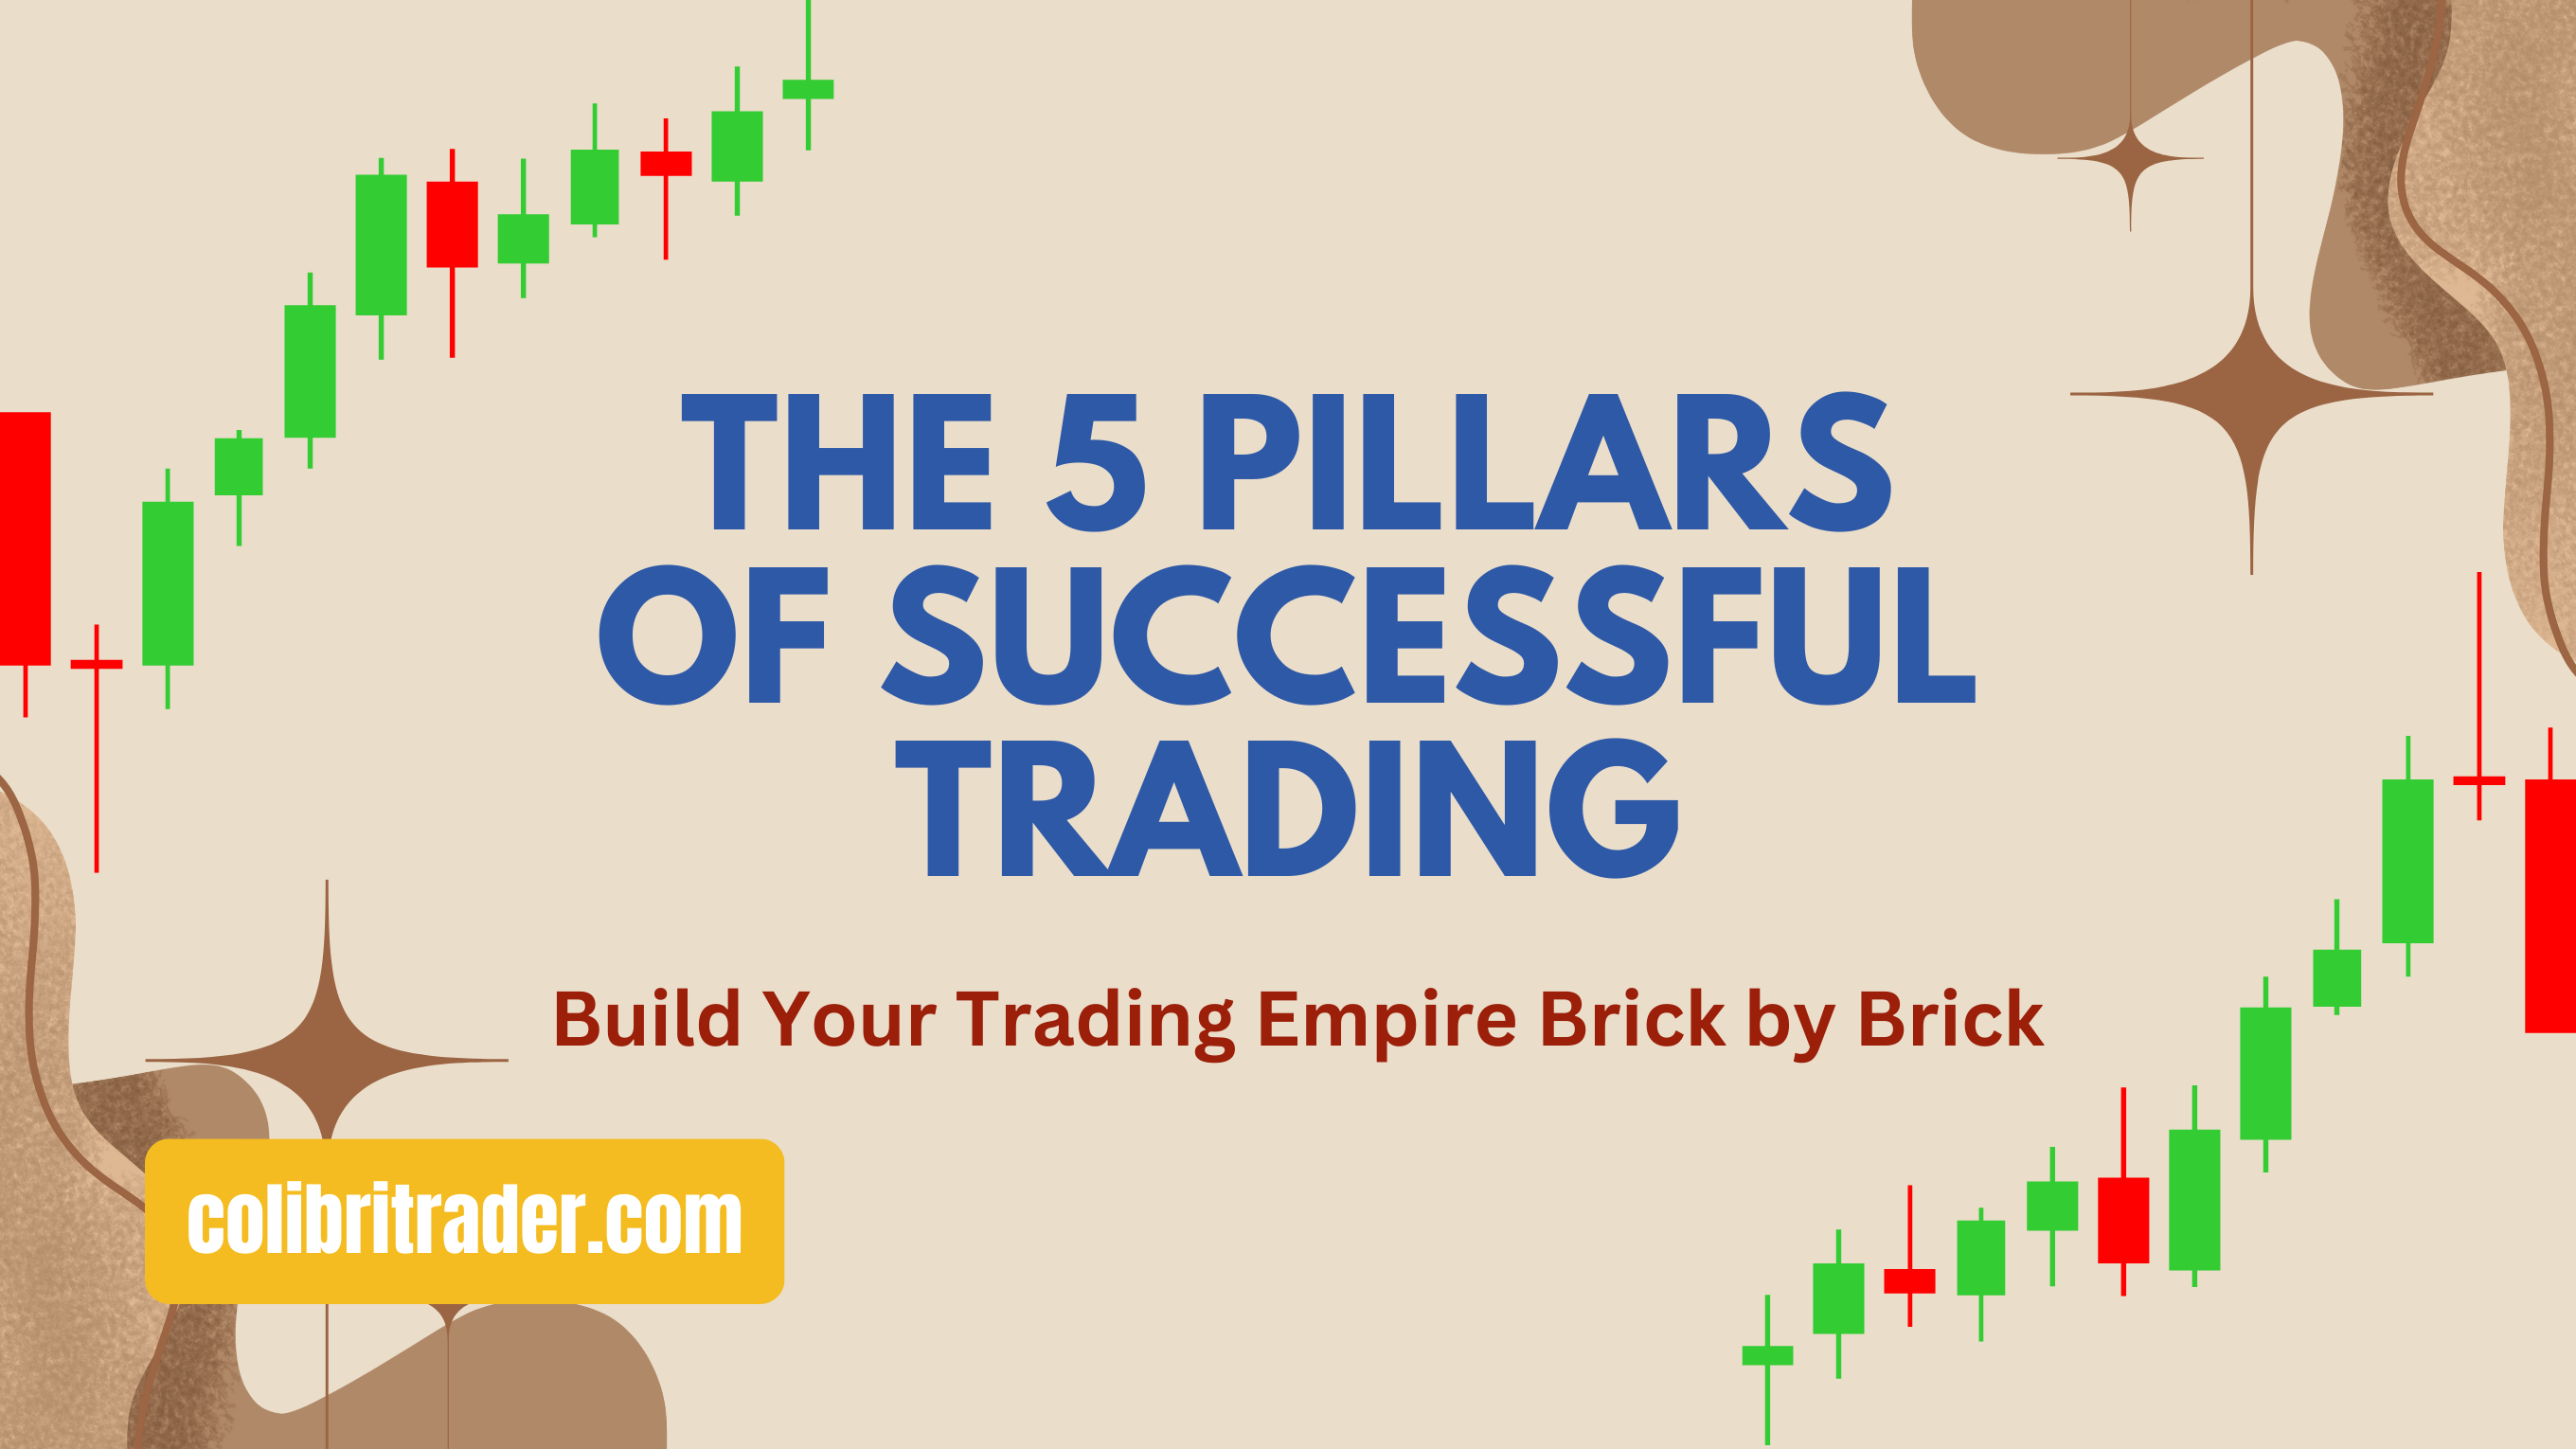 The 5 Pillars of Successful Trading: Build Your Trading Empire Brick by Brick